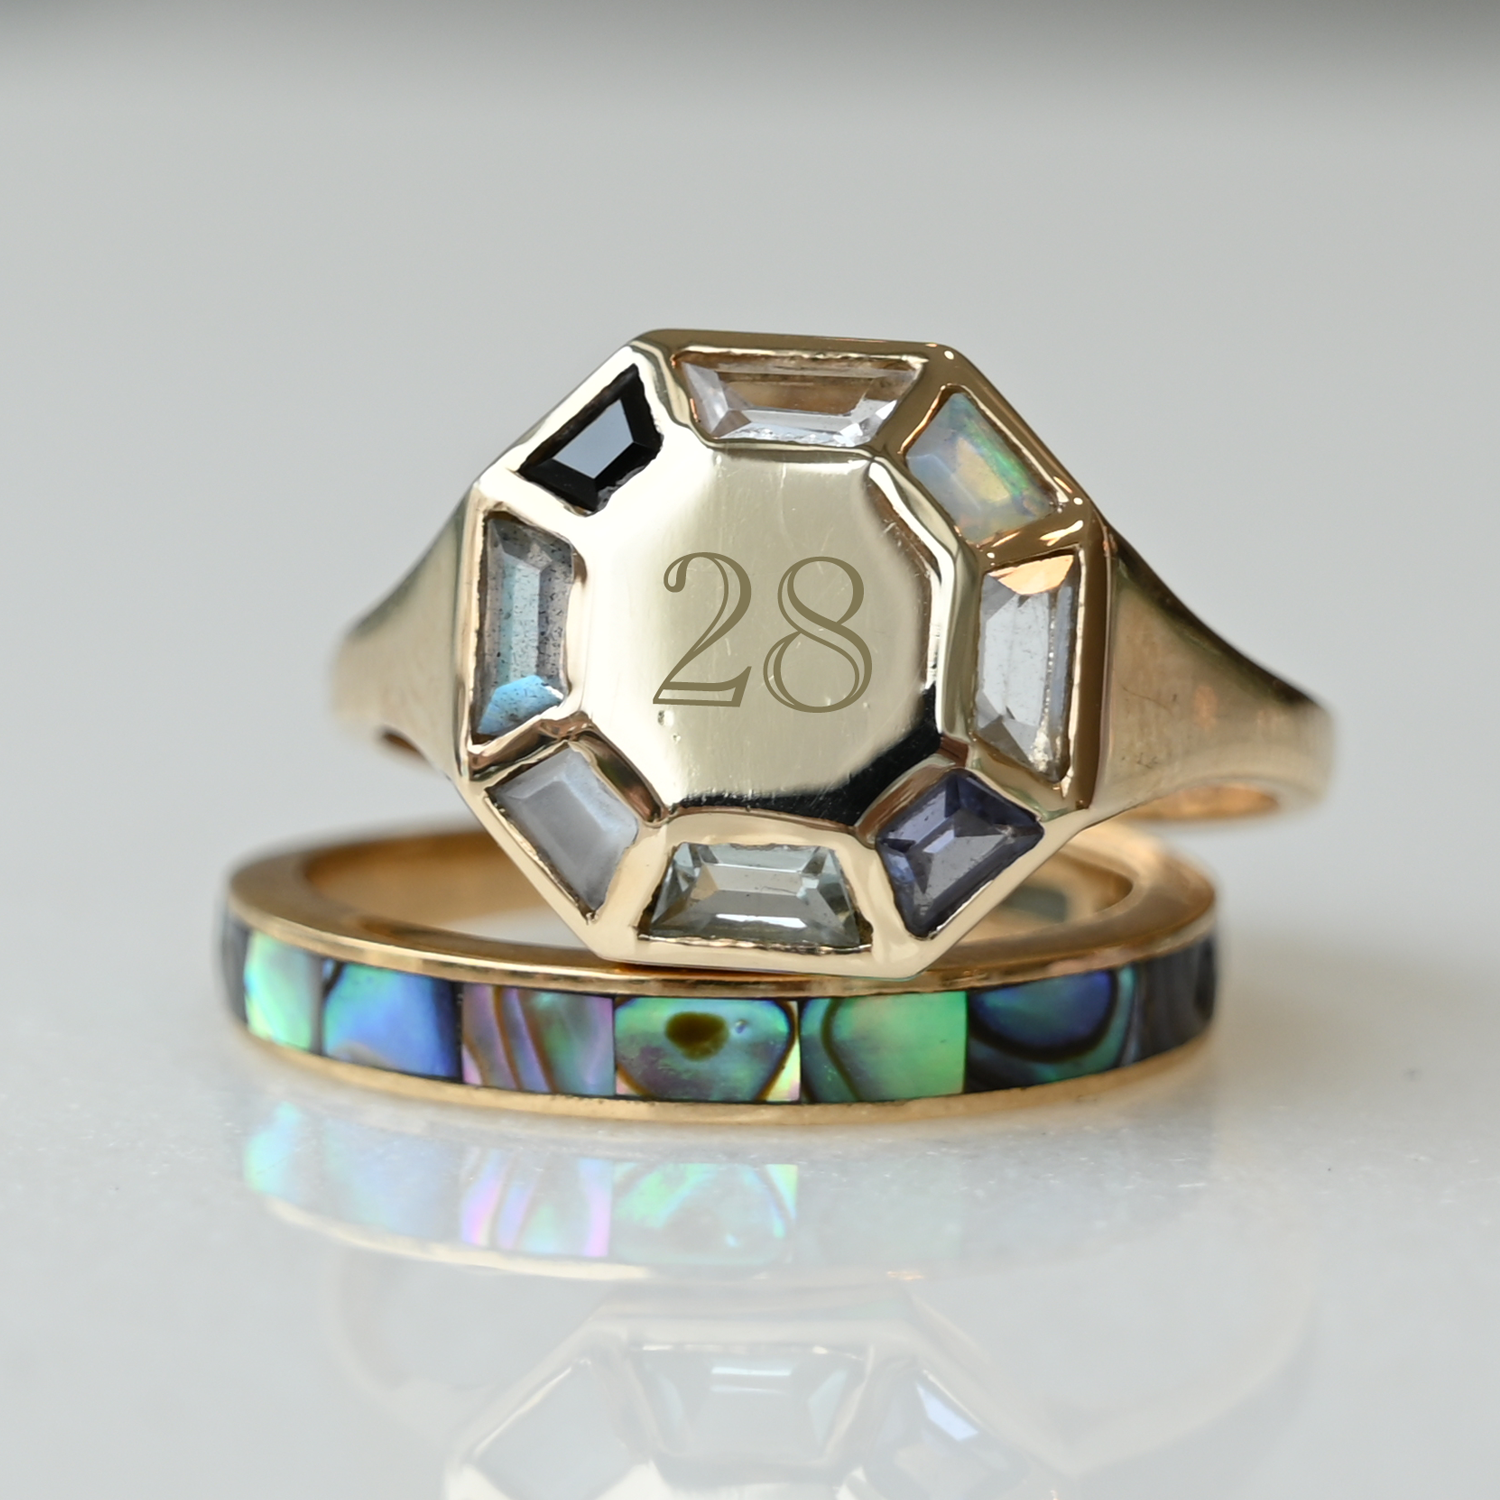 metier by tomfoolery tableu pastel signet ring with number 28 engraving